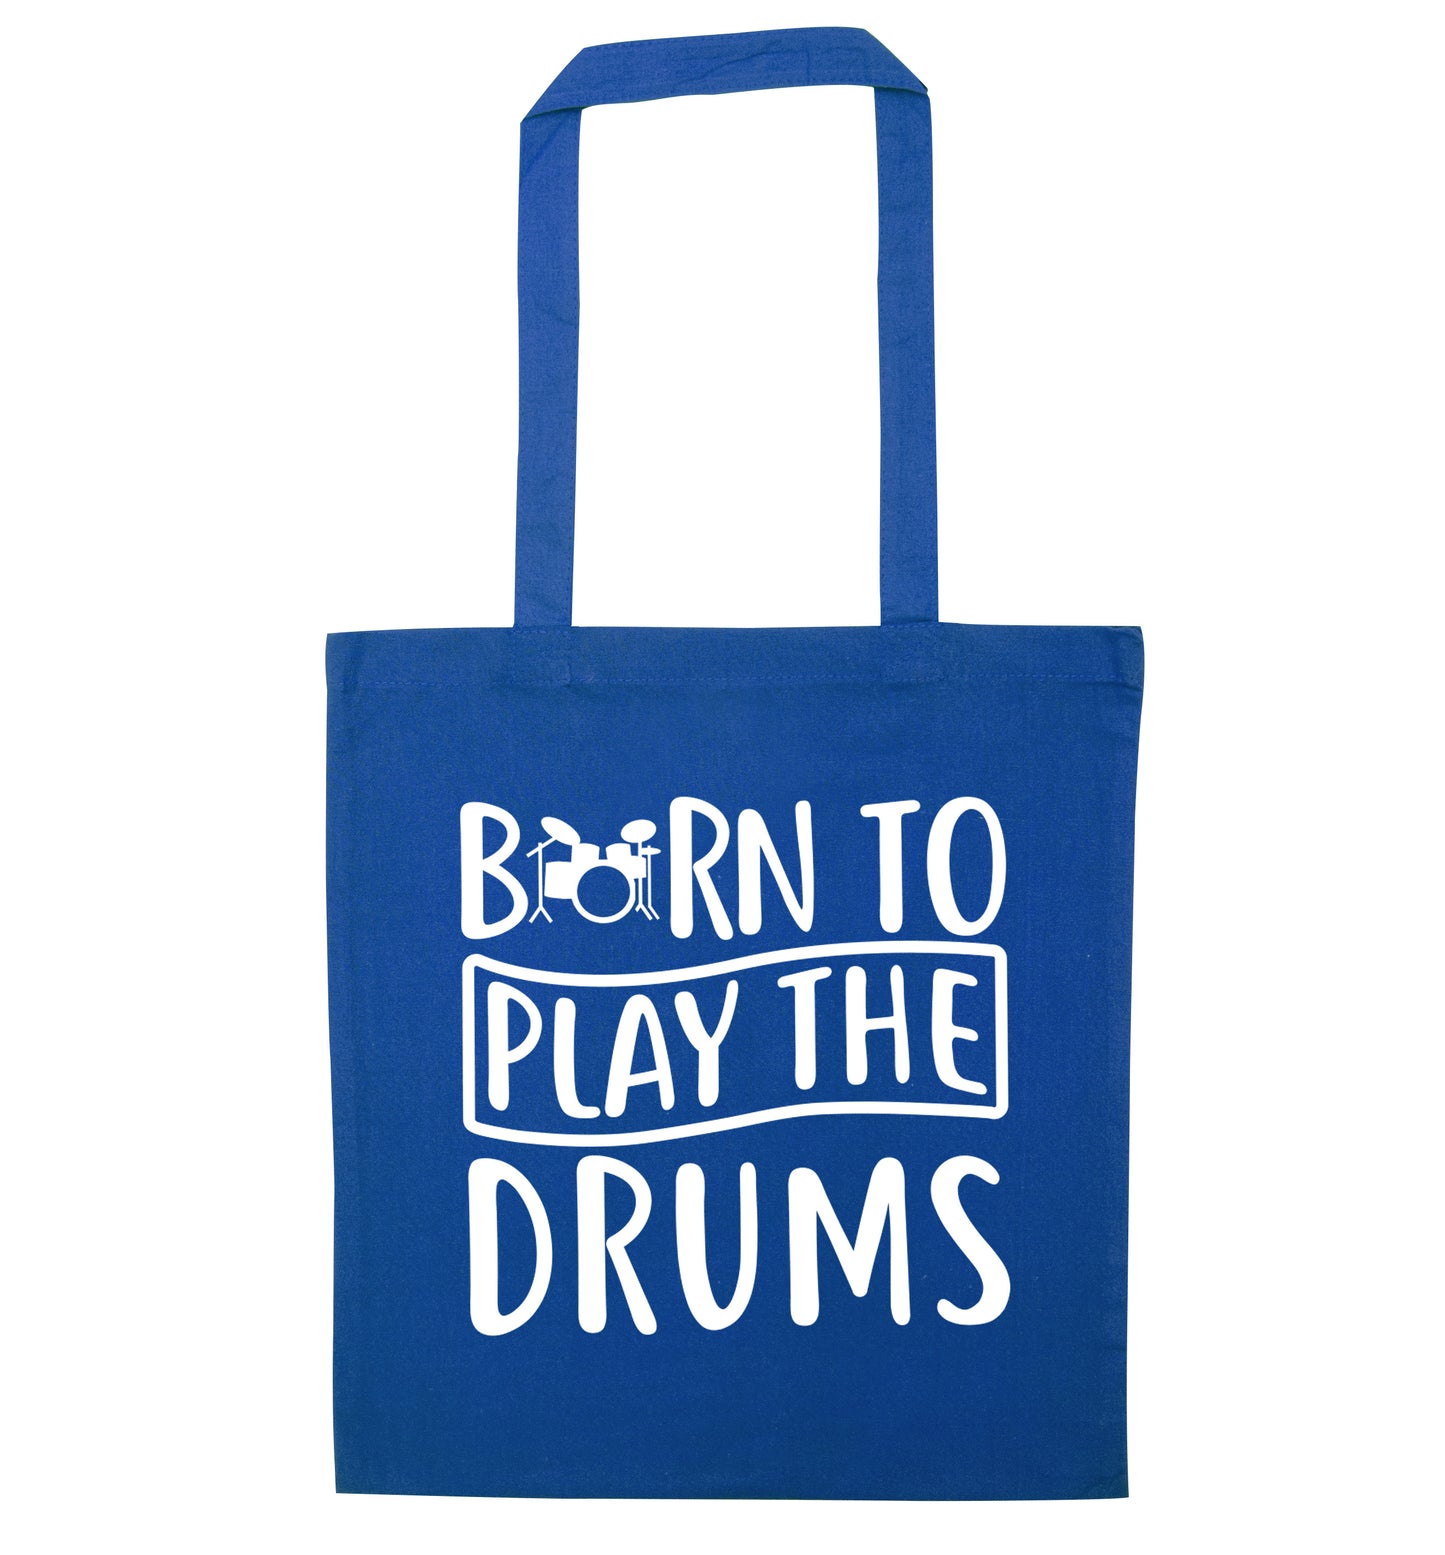 Born to play the drums blue tote bag